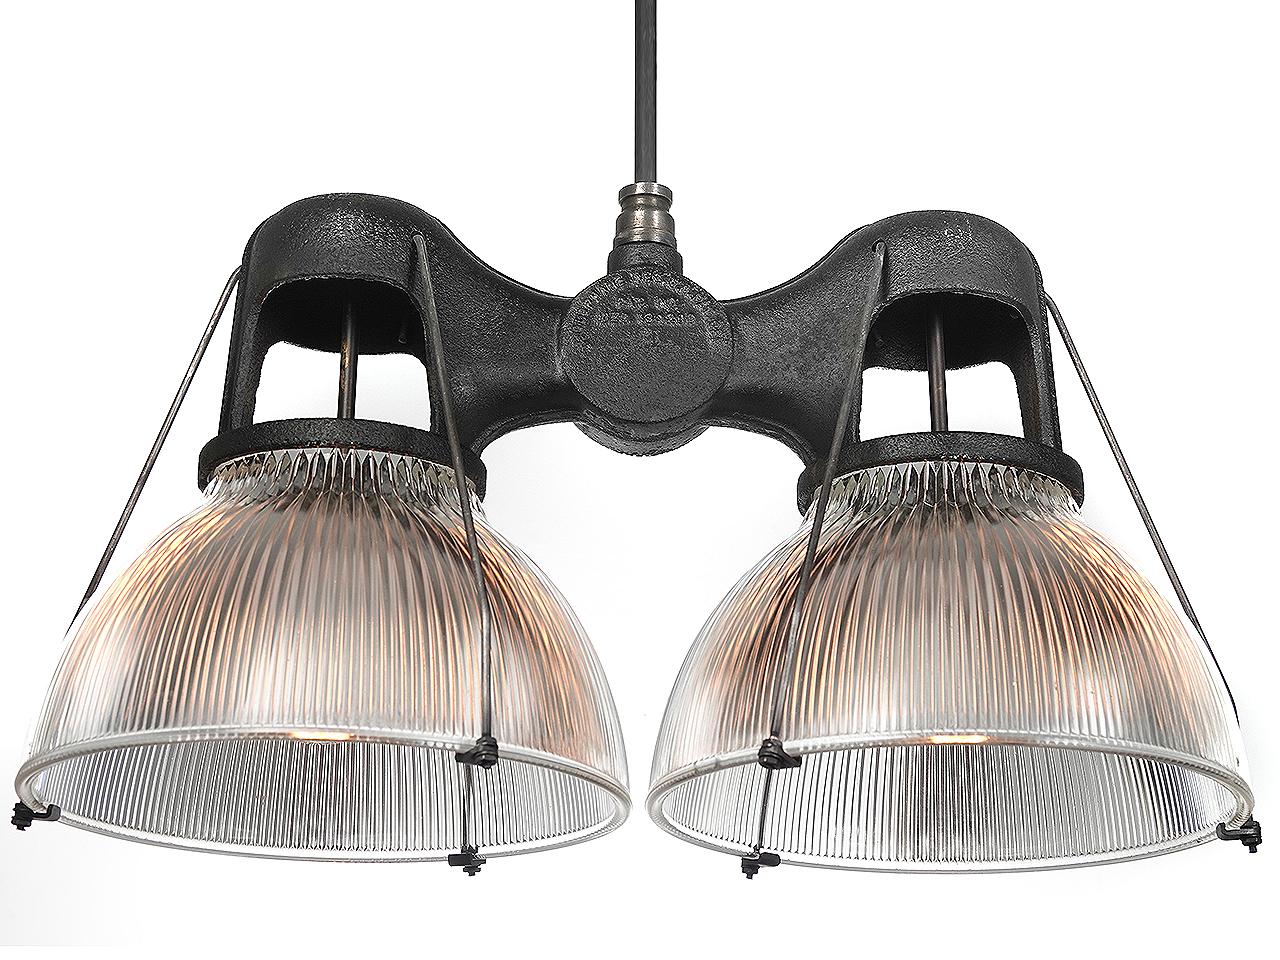 It's getting very hard to find these popular cast double holophanes. They are considered an icon of industrial lighting. It came 2 ways... with 2 matching size domes and with 2 different size domes. This example uses two 12 inch diameter shades of